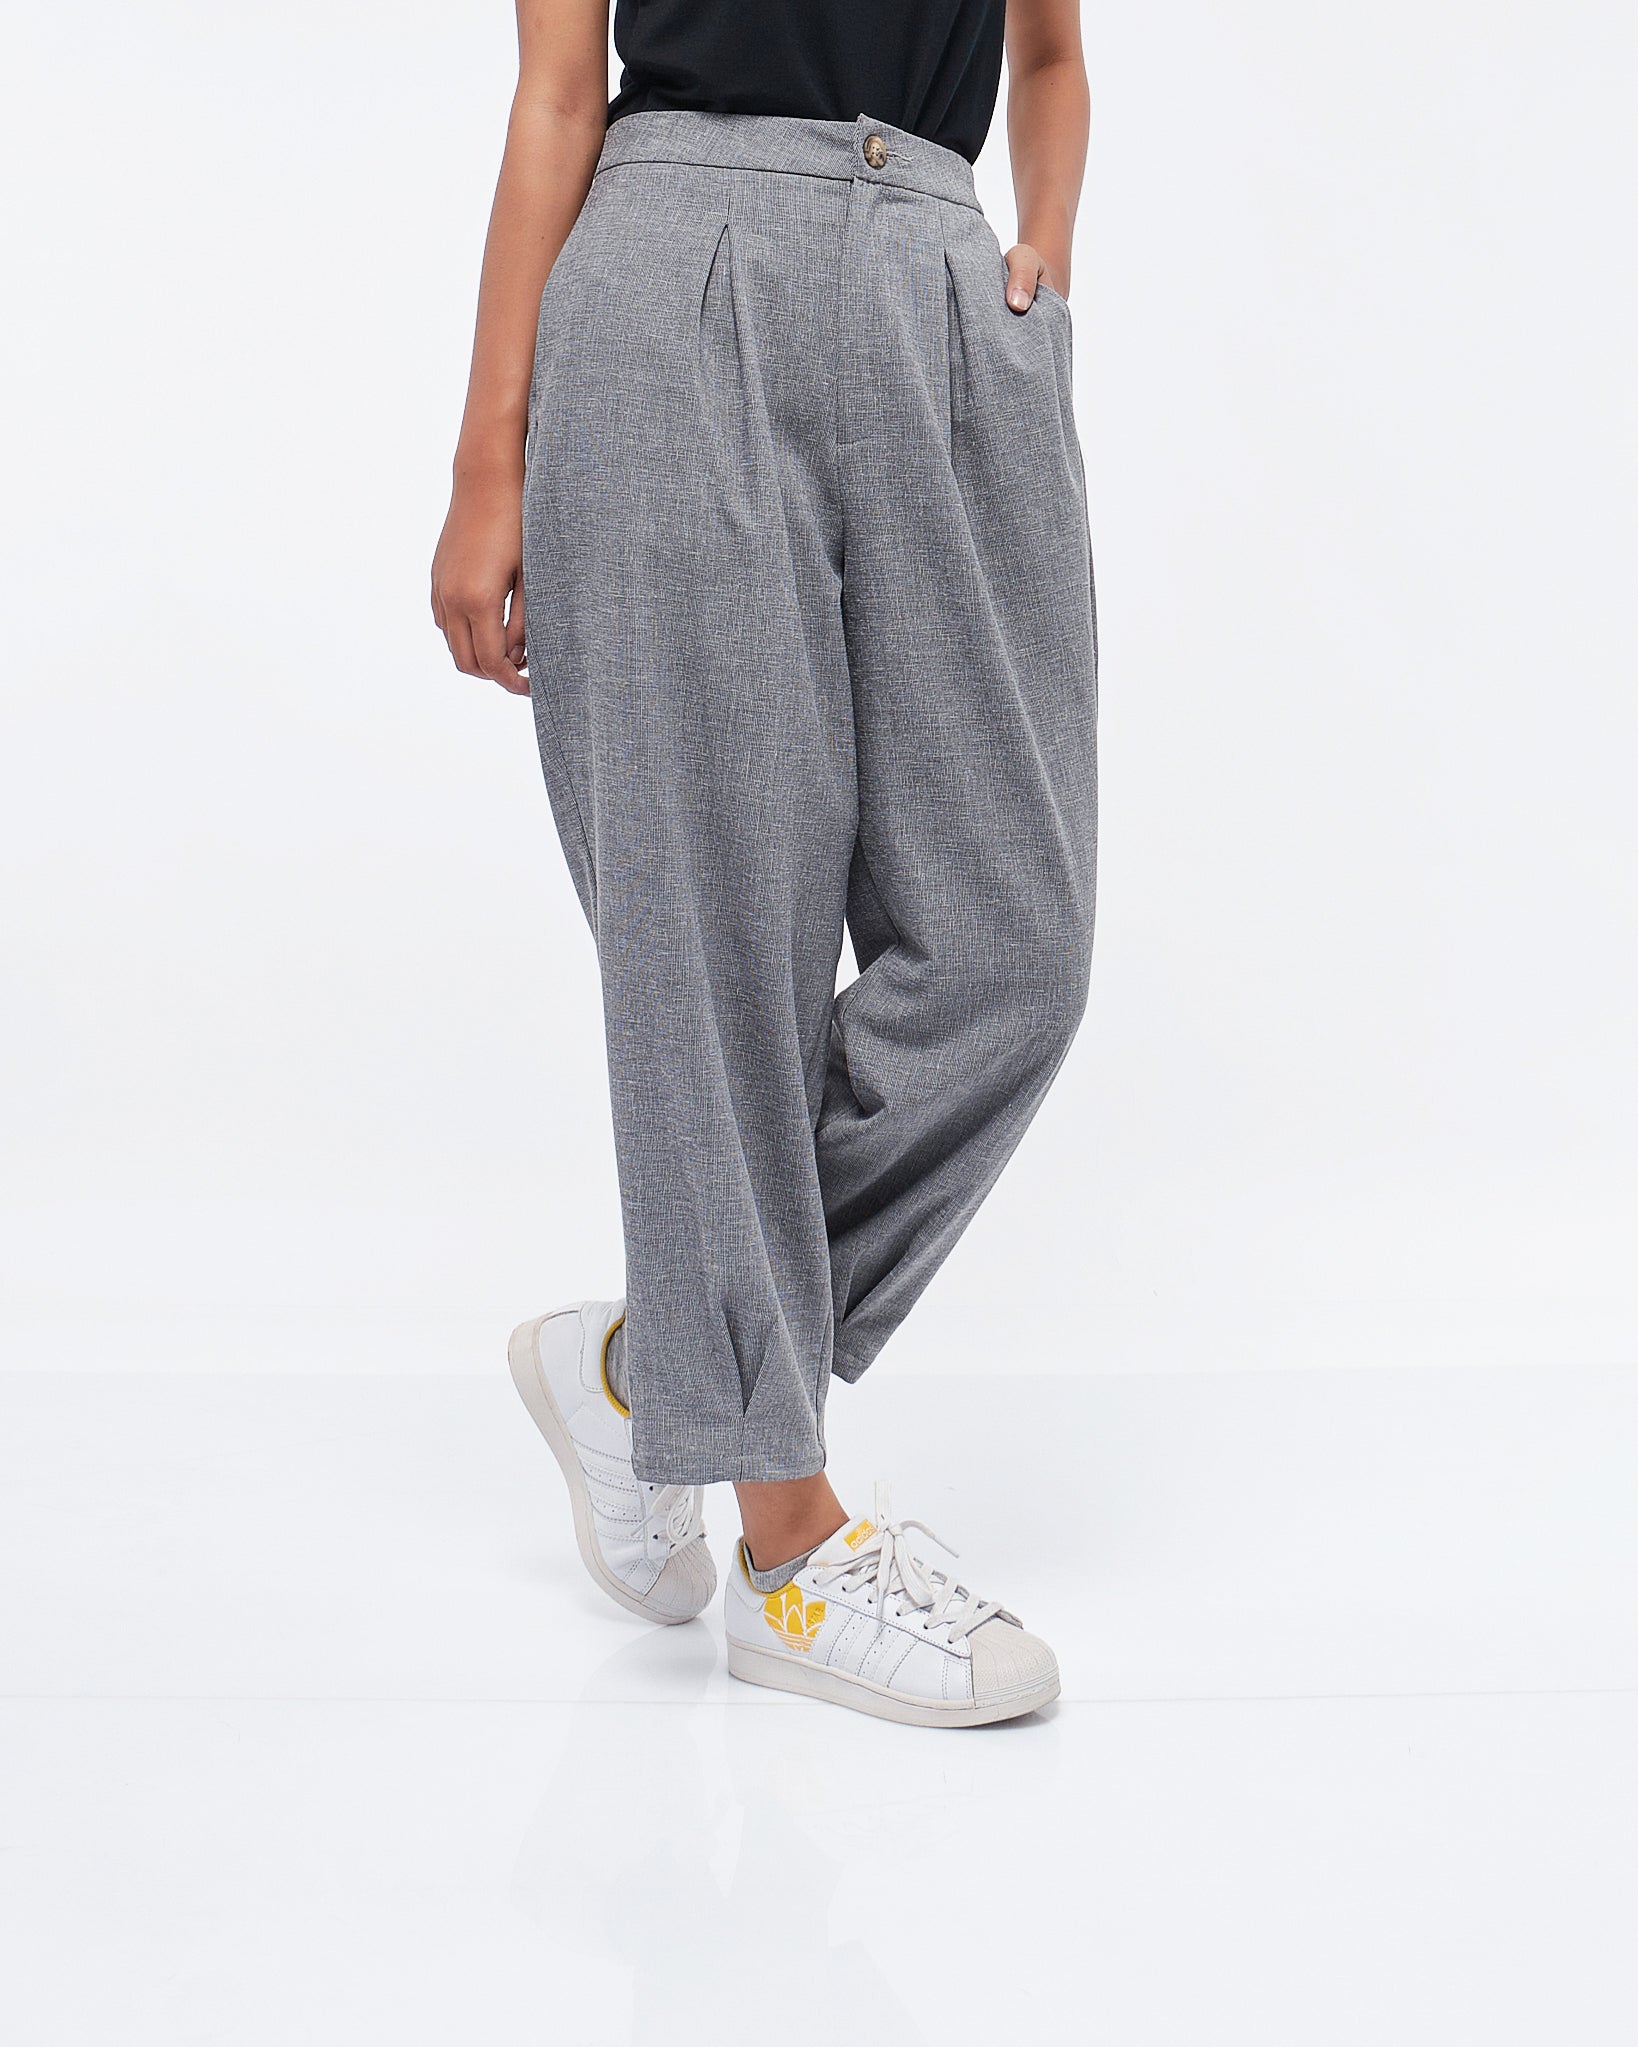 MOI OUTFIT-Loose Fit Lady Pants 16.90